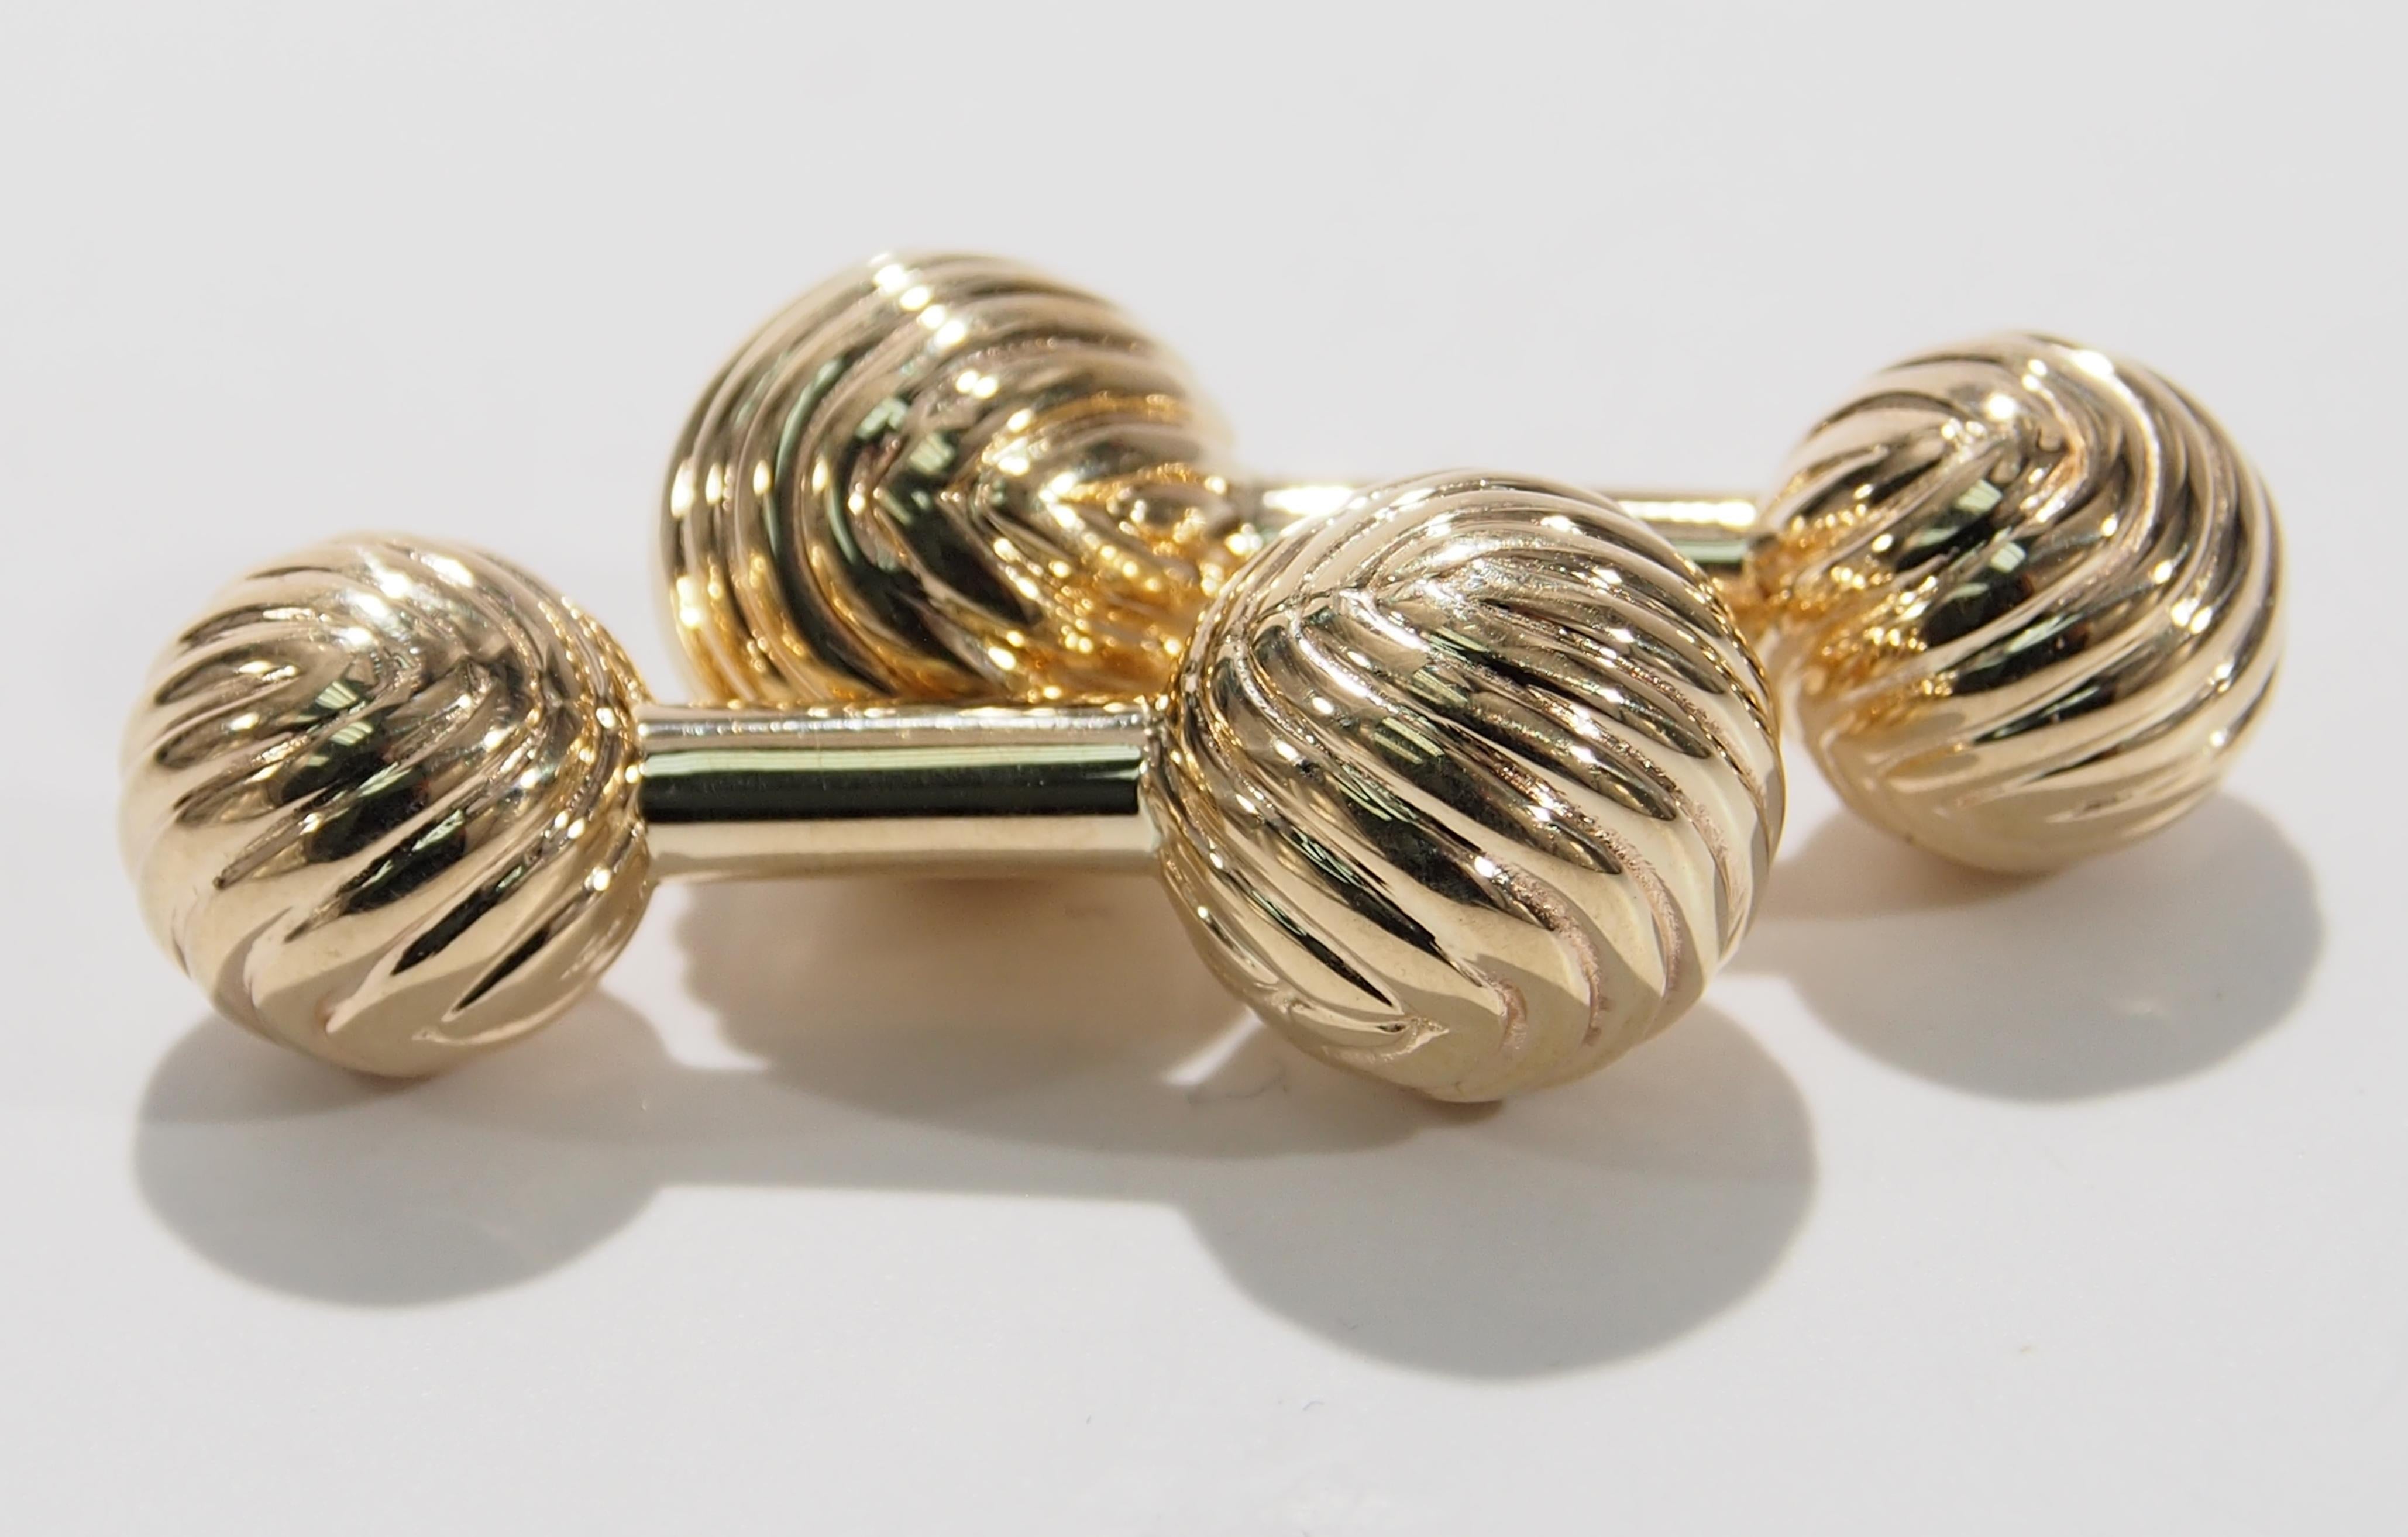 From the iconic jewelry designer, Tiffany & Company are this 14K Yellow Gold Cuff Links. They are designed with a classic spiral texture and are 1 1/4 inches in length, 1/4 inch in width. Tiffany & Co Cuff Links make a wonderful gift for a special